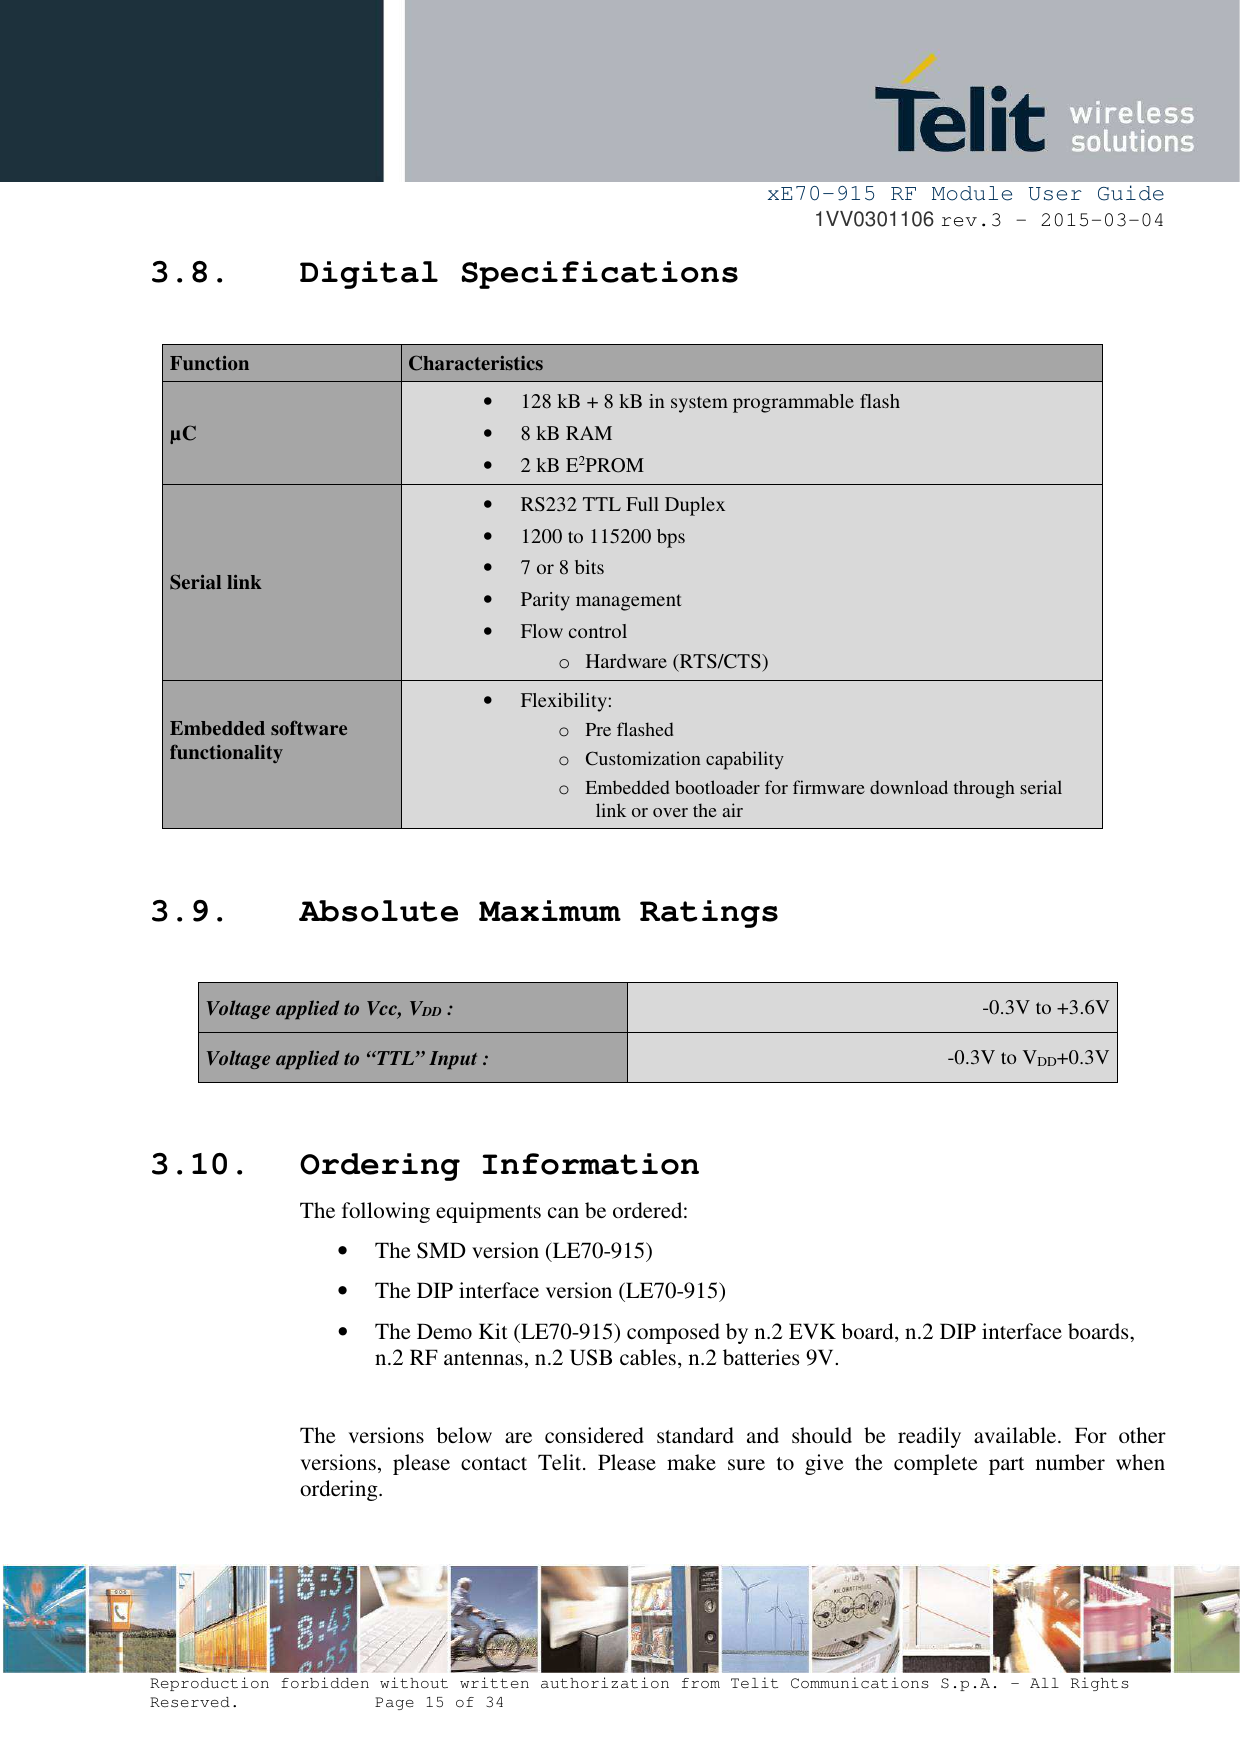     xE70-915 RF Module User Guide 1VV0301106 rev.3 – 2015-03-04  Reproduction forbidden without written authorization from Telit Communications S.p.A. - All Rights Reserved.    Page 15 of 34  3.8. Digital Specifications  Function  Characteristics µC • 128 kB + 8 kB in system programmable flash • 8 kB RAM • 2 kB E2PROM Serial link • RS232 TTL Full Duplex • 1200 to 115200 bps • 7 or 8 bits • Parity management • Flow control o Hardware (RTS/CTS) Embedded software functionality  • Flexibility: o Pre flashed o Customization capability o Embedded bootloader for firmware download through serial link or over the air  3.9. Absolute Maximum Ratings  Voltage applied to Vcc, VDD :  -0.3V to +3.6V Voltage applied to “TTL” Input :  -0.3V to VDD+0.3V   3.10. Ordering Information The following equipments can be ordered: • The SMD version (LE70-915) • The DIP interface version (LE70-915) • The Demo Kit (LE70-915) composed by n.2 EVK board, n.2 DIP interface boards, n.2 RF antennas, n.2 USB cables, n.2 batteries 9V.  The  versions  below  are  considered  standard  and  should  be  readily  available.  For  other versions,  please  contact  Telit.  Please  make  sure  to  give  the  complete  part  number  when ordering.   